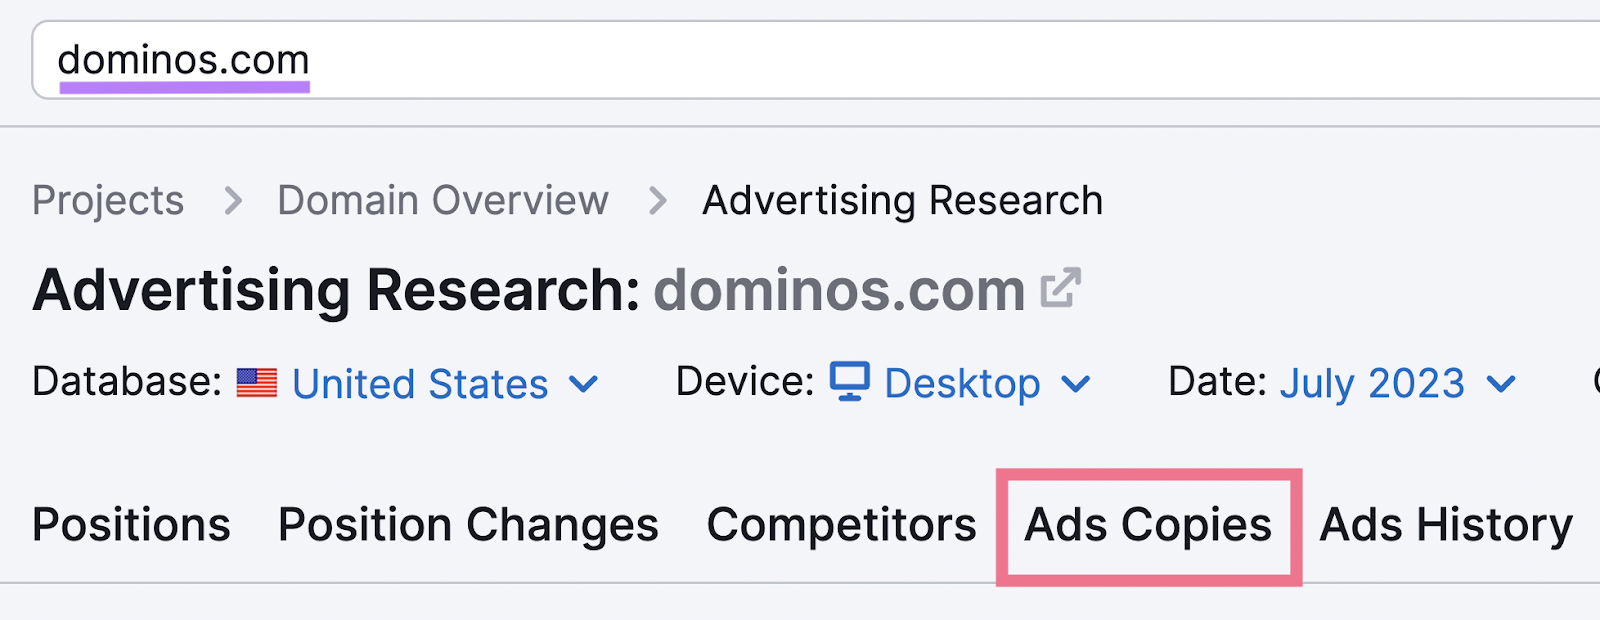 an example of searching for "dominos.com" in the “Ads Copies” tab in the Advertising Research tool